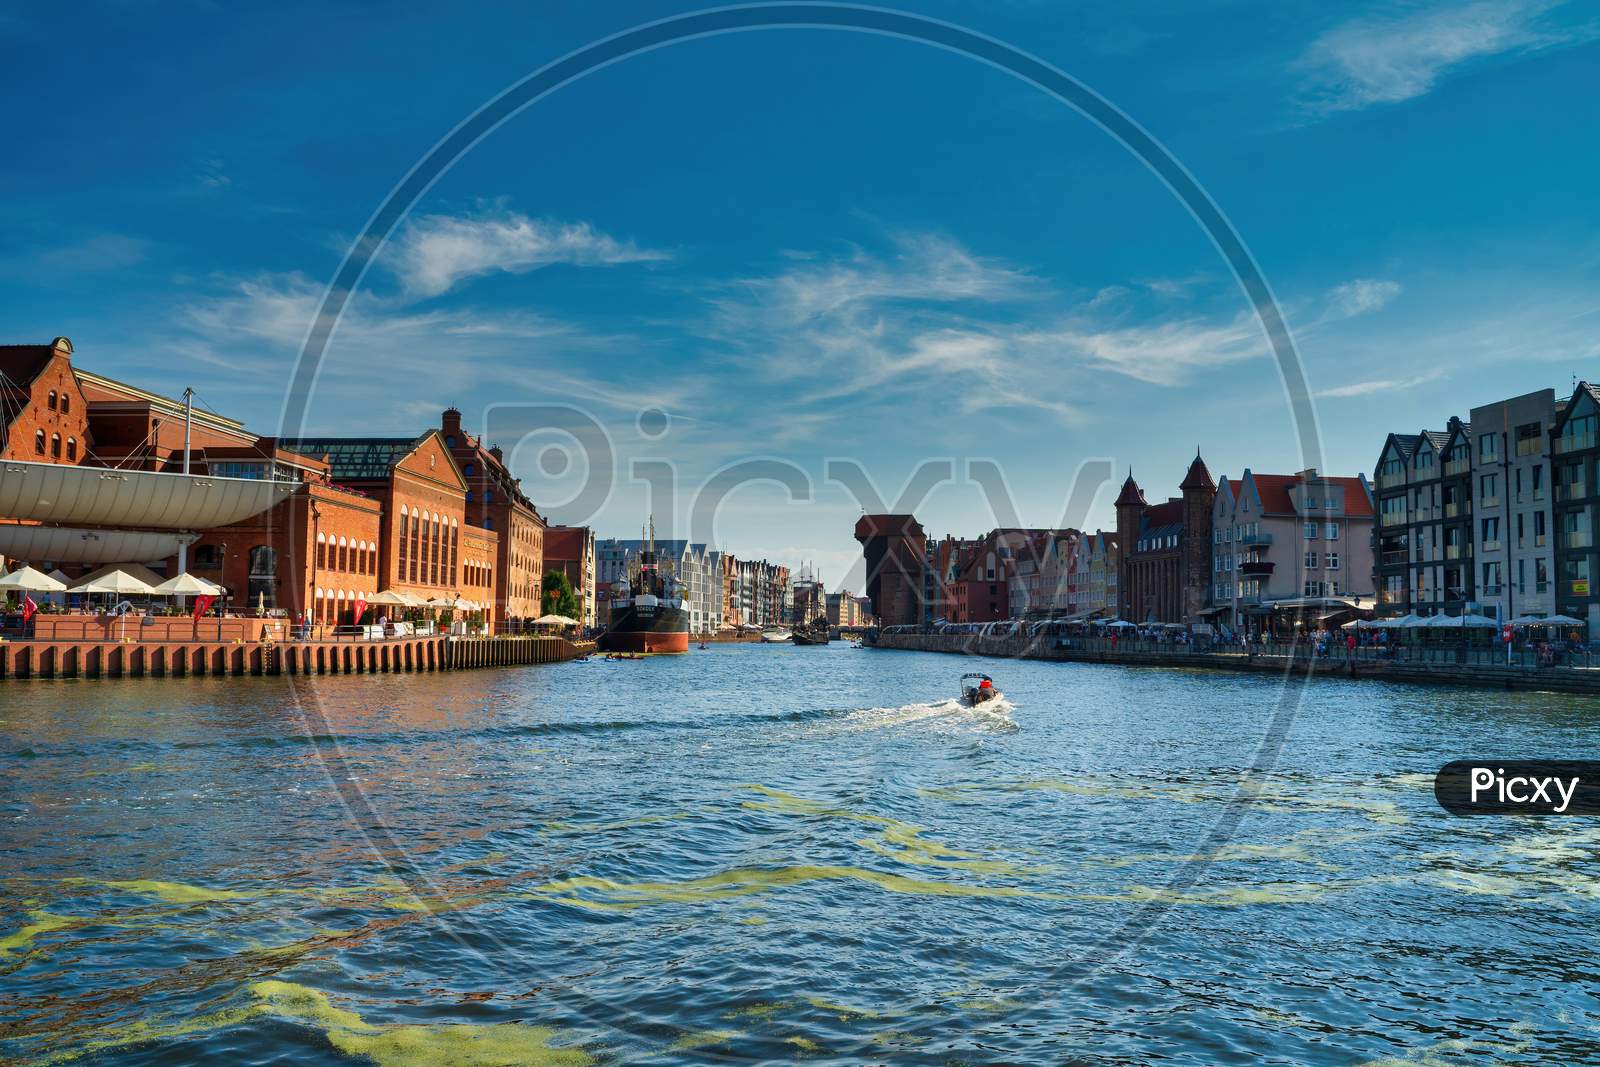 Gdansk, North Poland - August 13, 2020: Panoramic View Of Summer In Motlawa River Adjacent To Beautiful European Architecture Near Baltic Sea During Covid 19 Pandemic Against Blue Sky